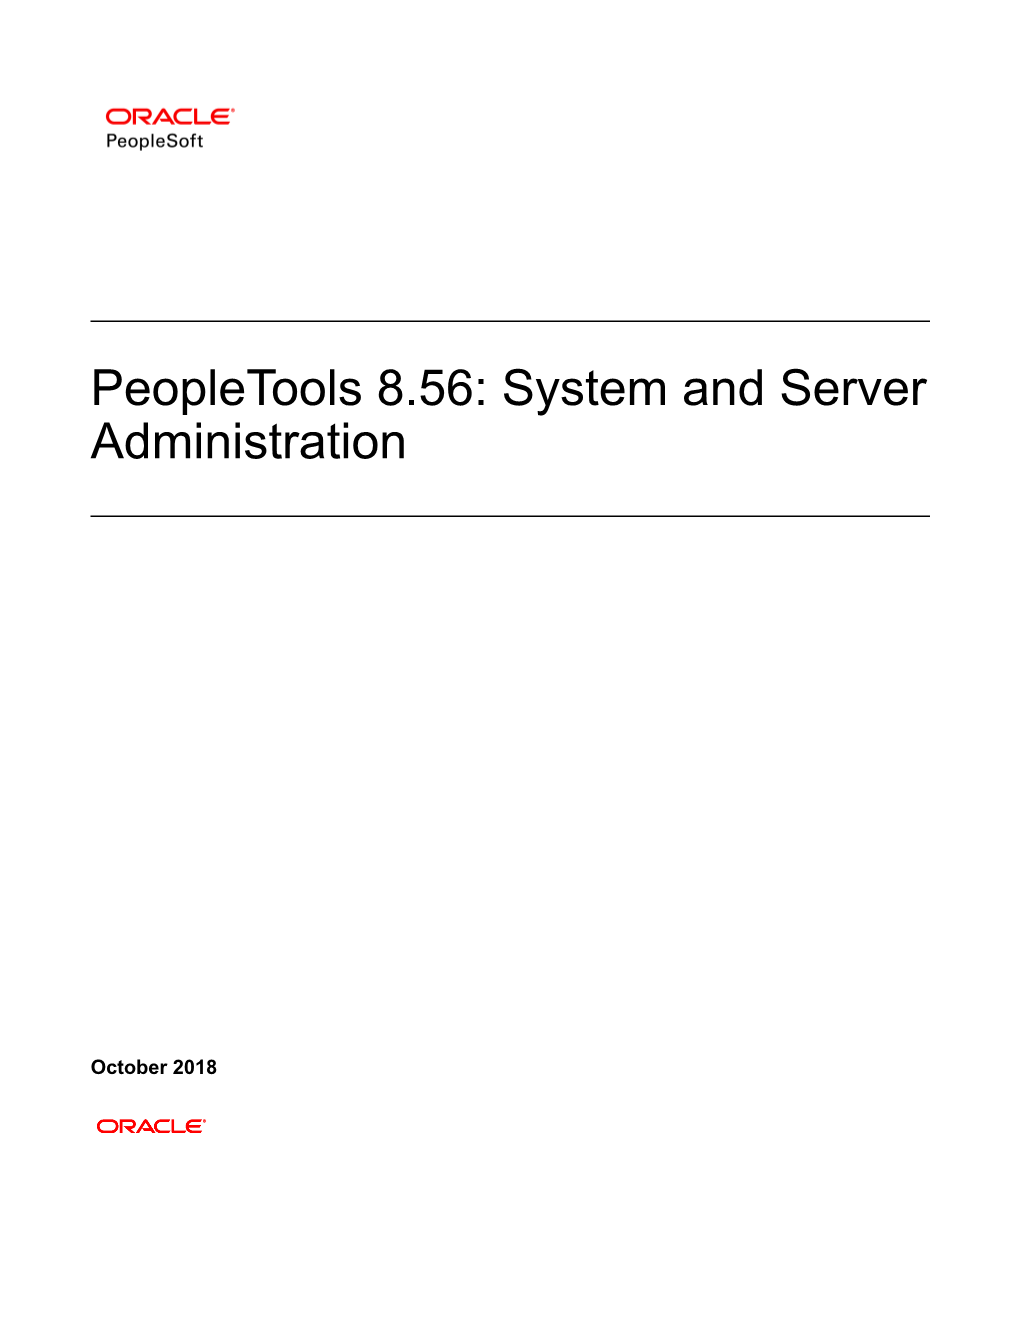 Peopletools 8.56: System and Server Administration